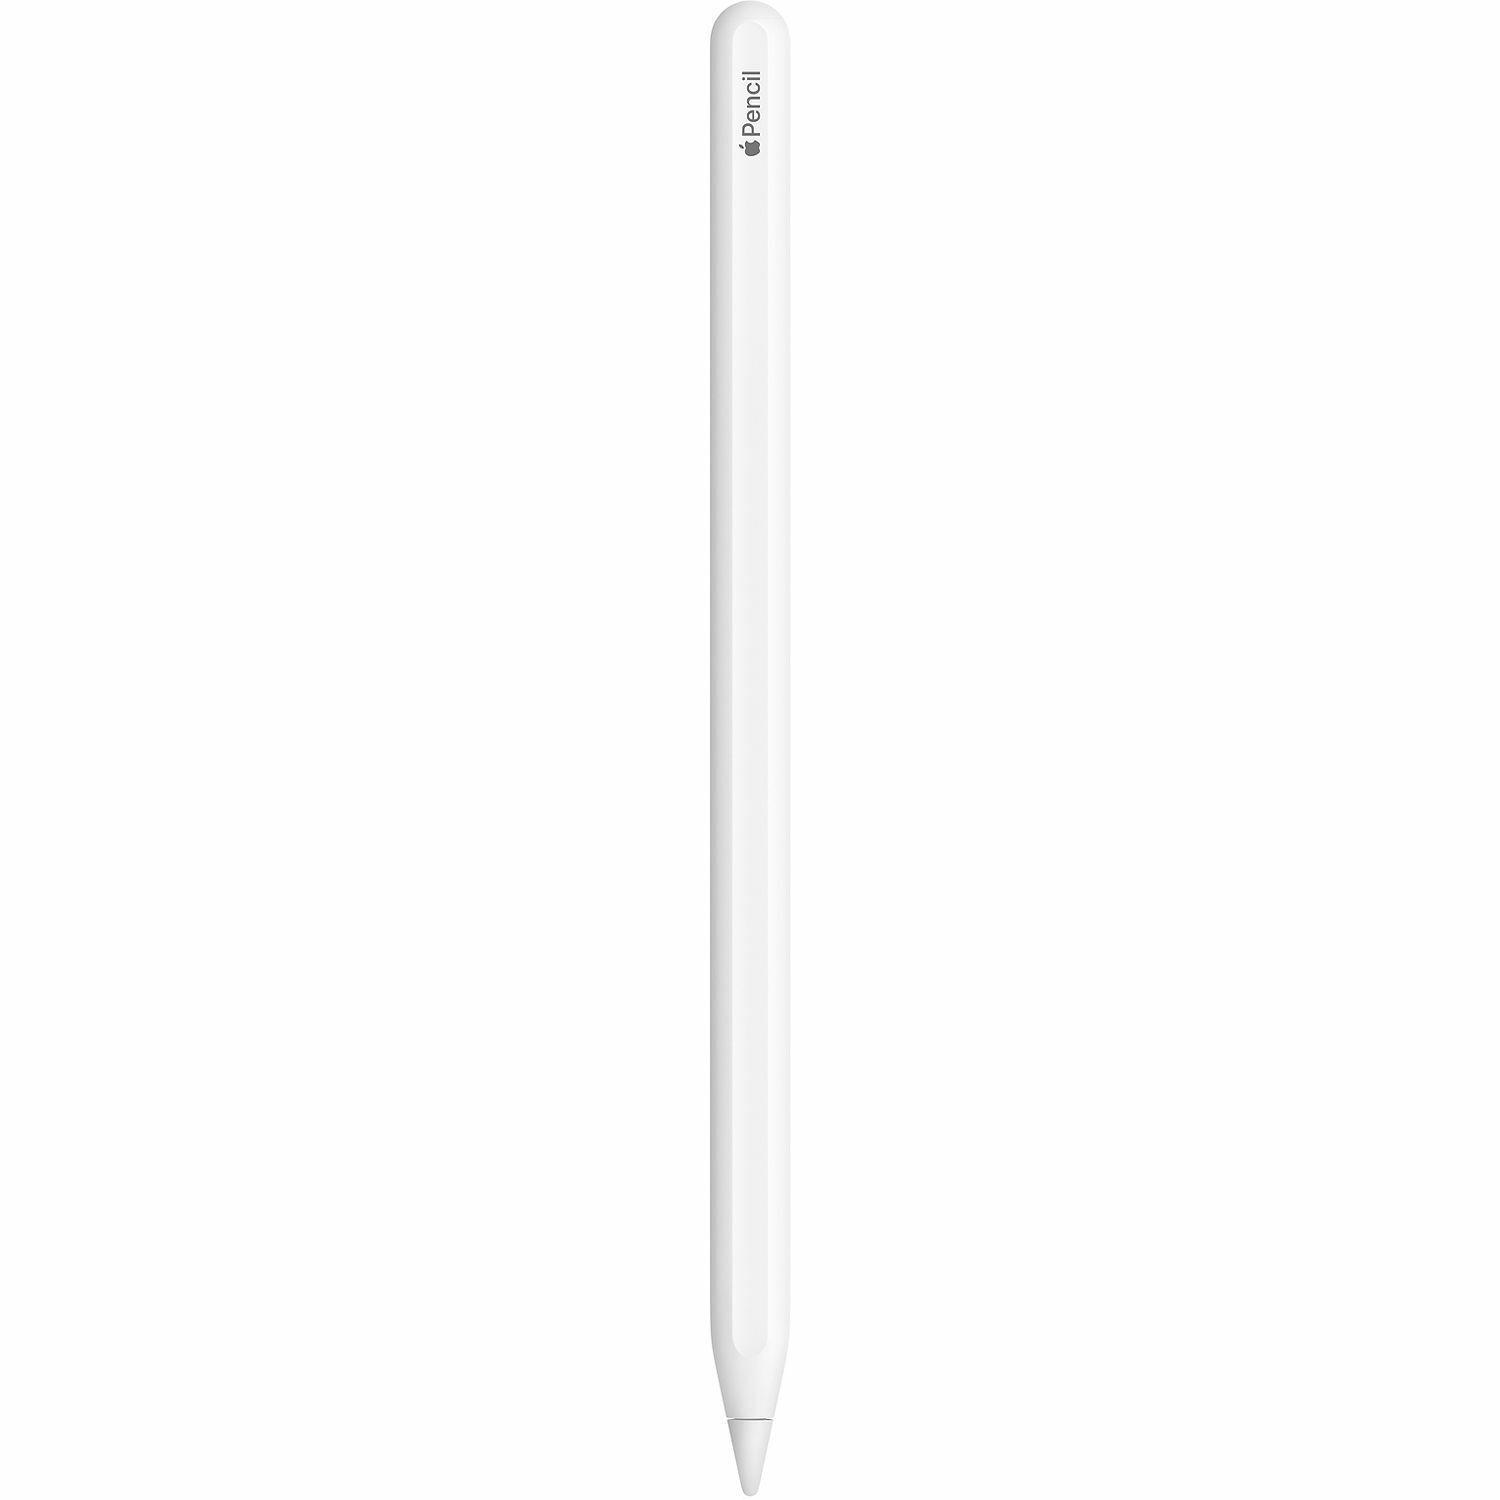 Apple Pencil 2nd Gen MU8F2AMA Used Condition for $54 Shipped